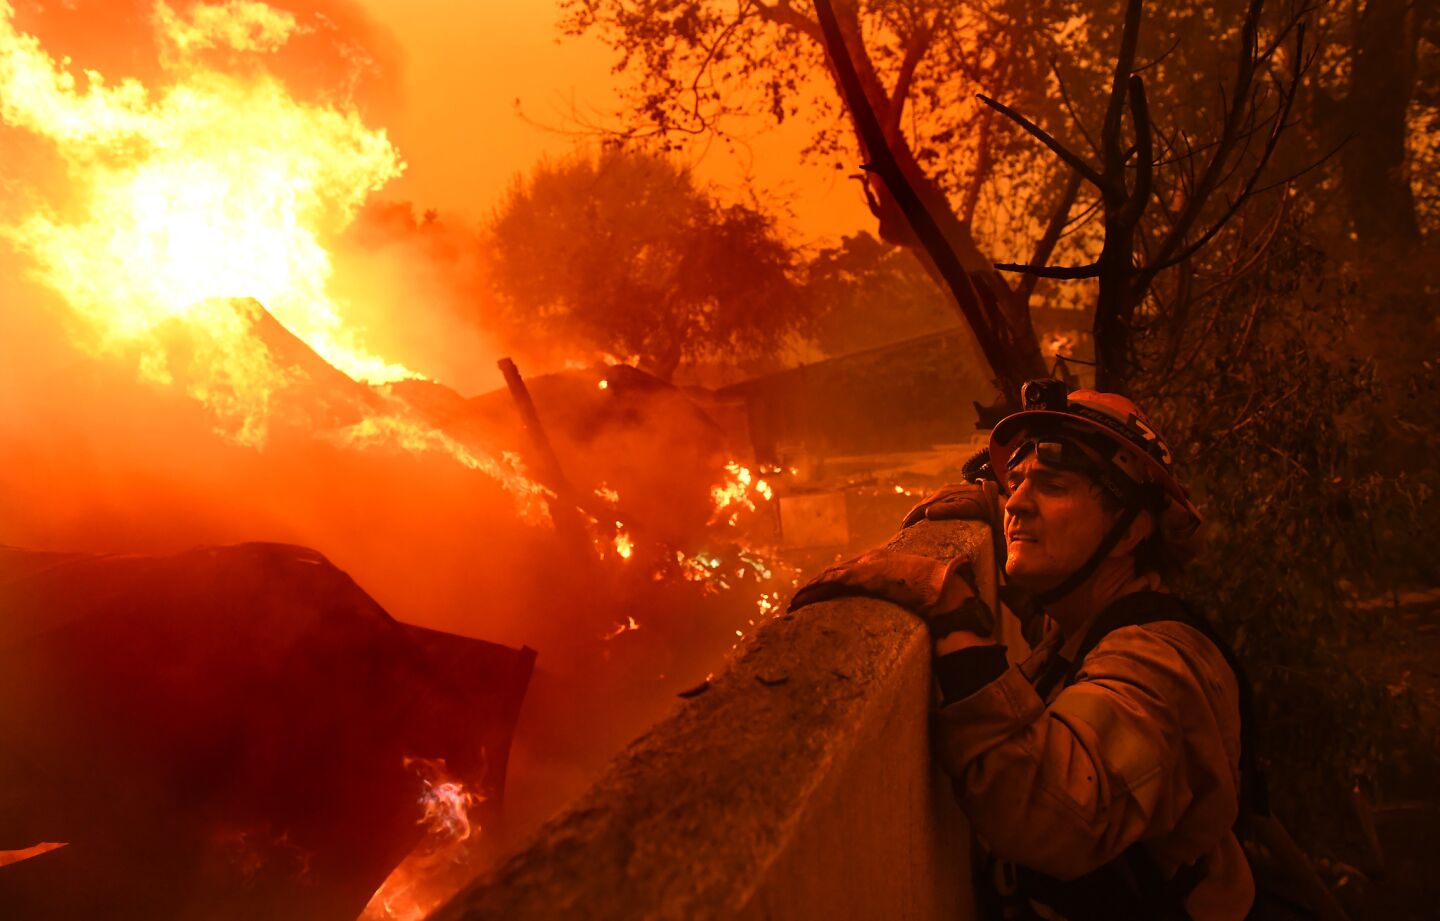 Mayor and firefighter Rick Mullen surveys a house on fire in Malibu as the Woolsey fire continues its path to the coast.